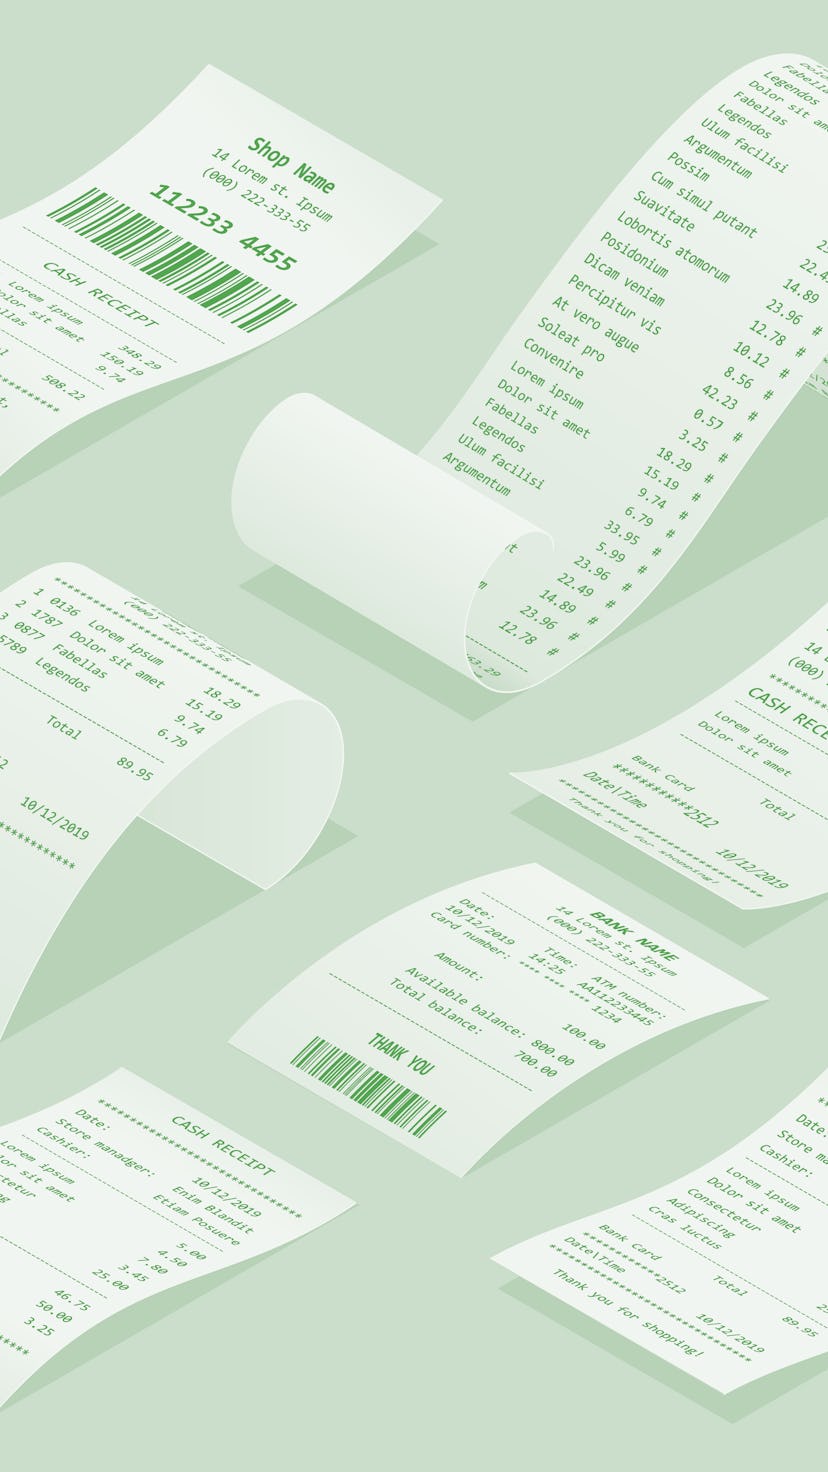 Isometric set of paper check and financial check isolated. Cash register sales receipts printed on t...